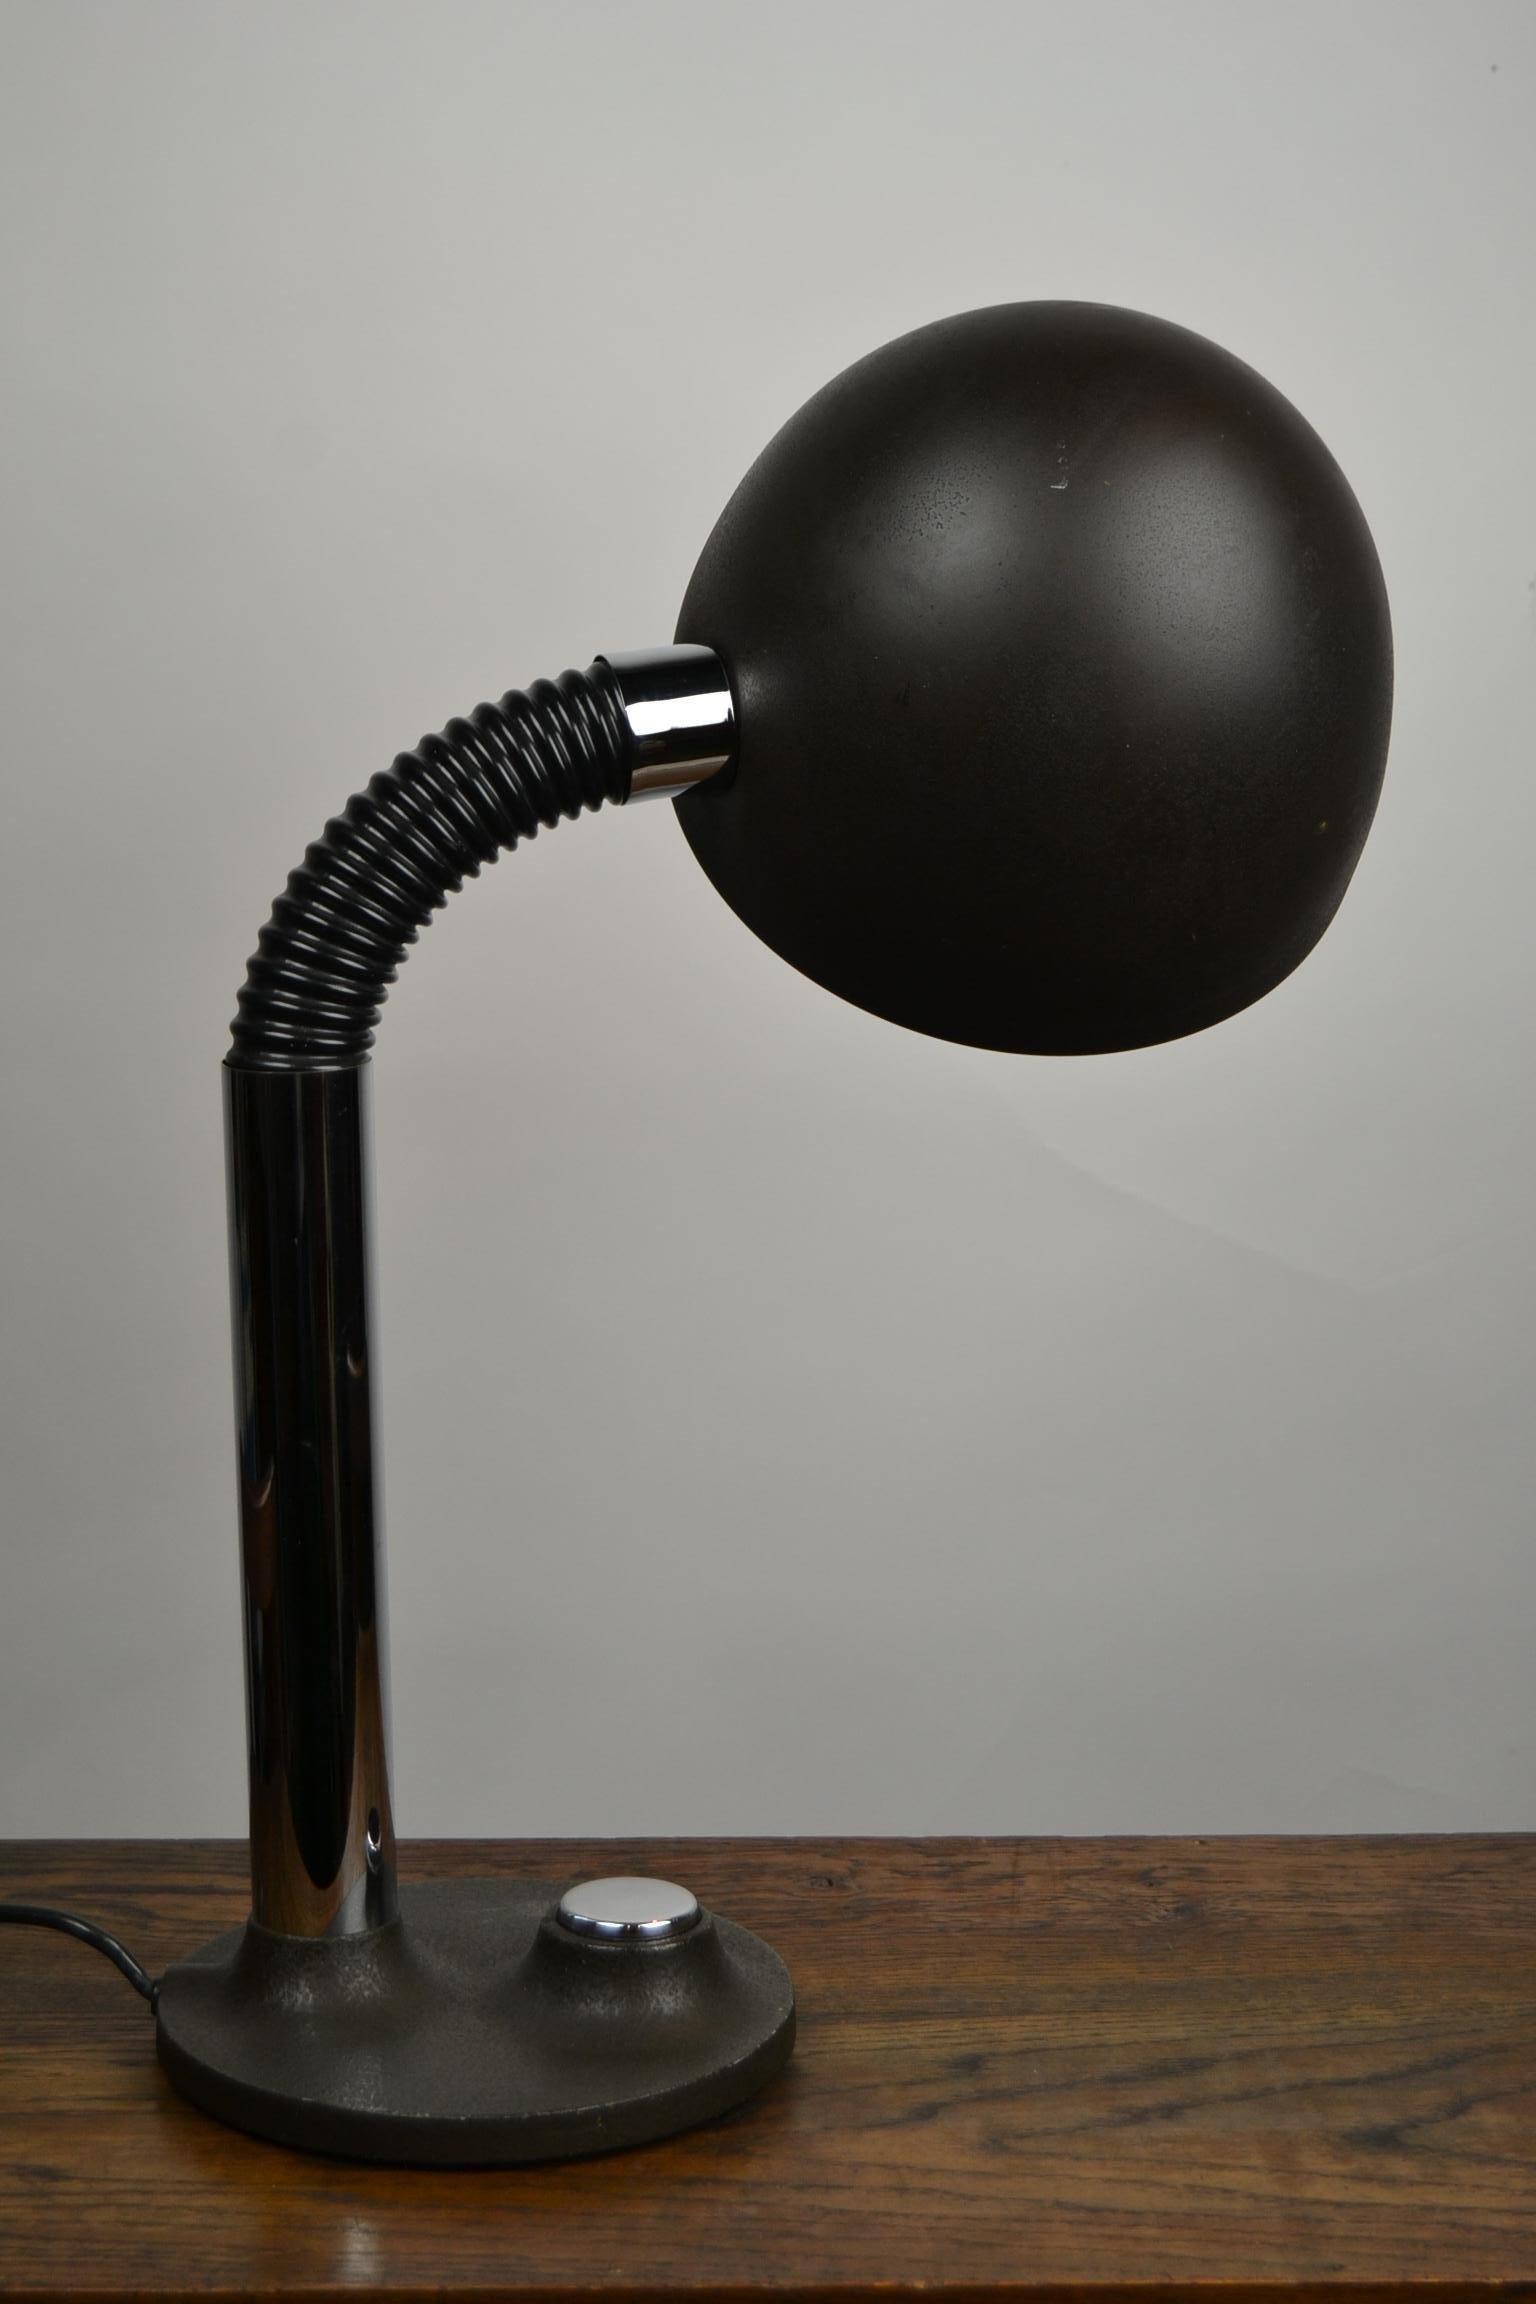 Industrial design desk lamp by Egon Hillebrand for Hillebrand Lighting.
The table lamp has a jointed and flexible arm what makes him functional to shine up, down and to the side.
This 1970s lighting has a organic shaped cast iron base with a large